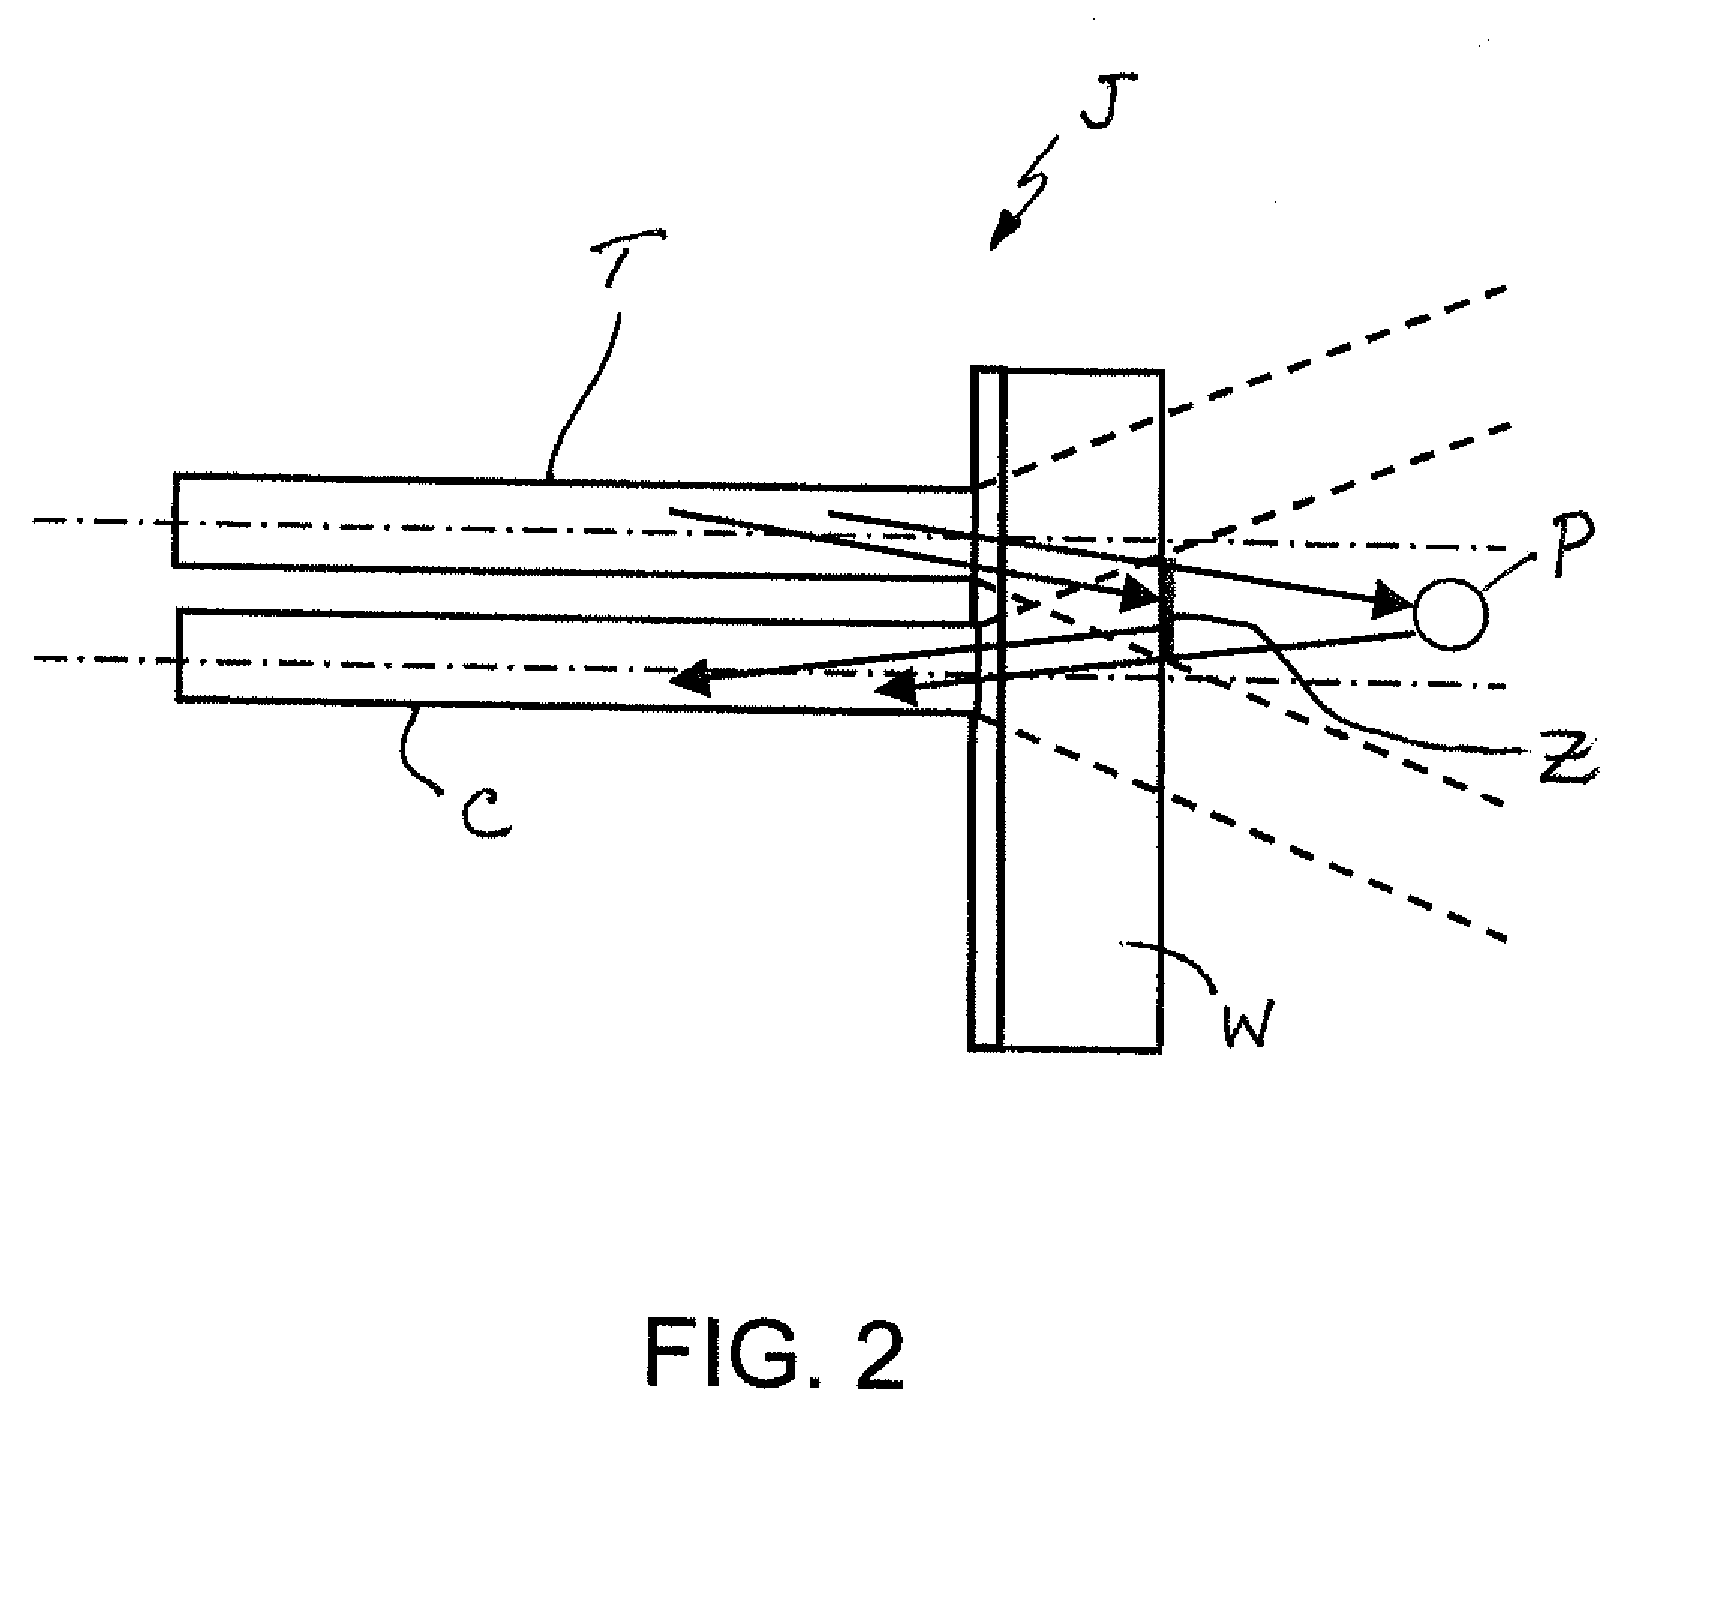 Apparatus and method for improved processing of food products